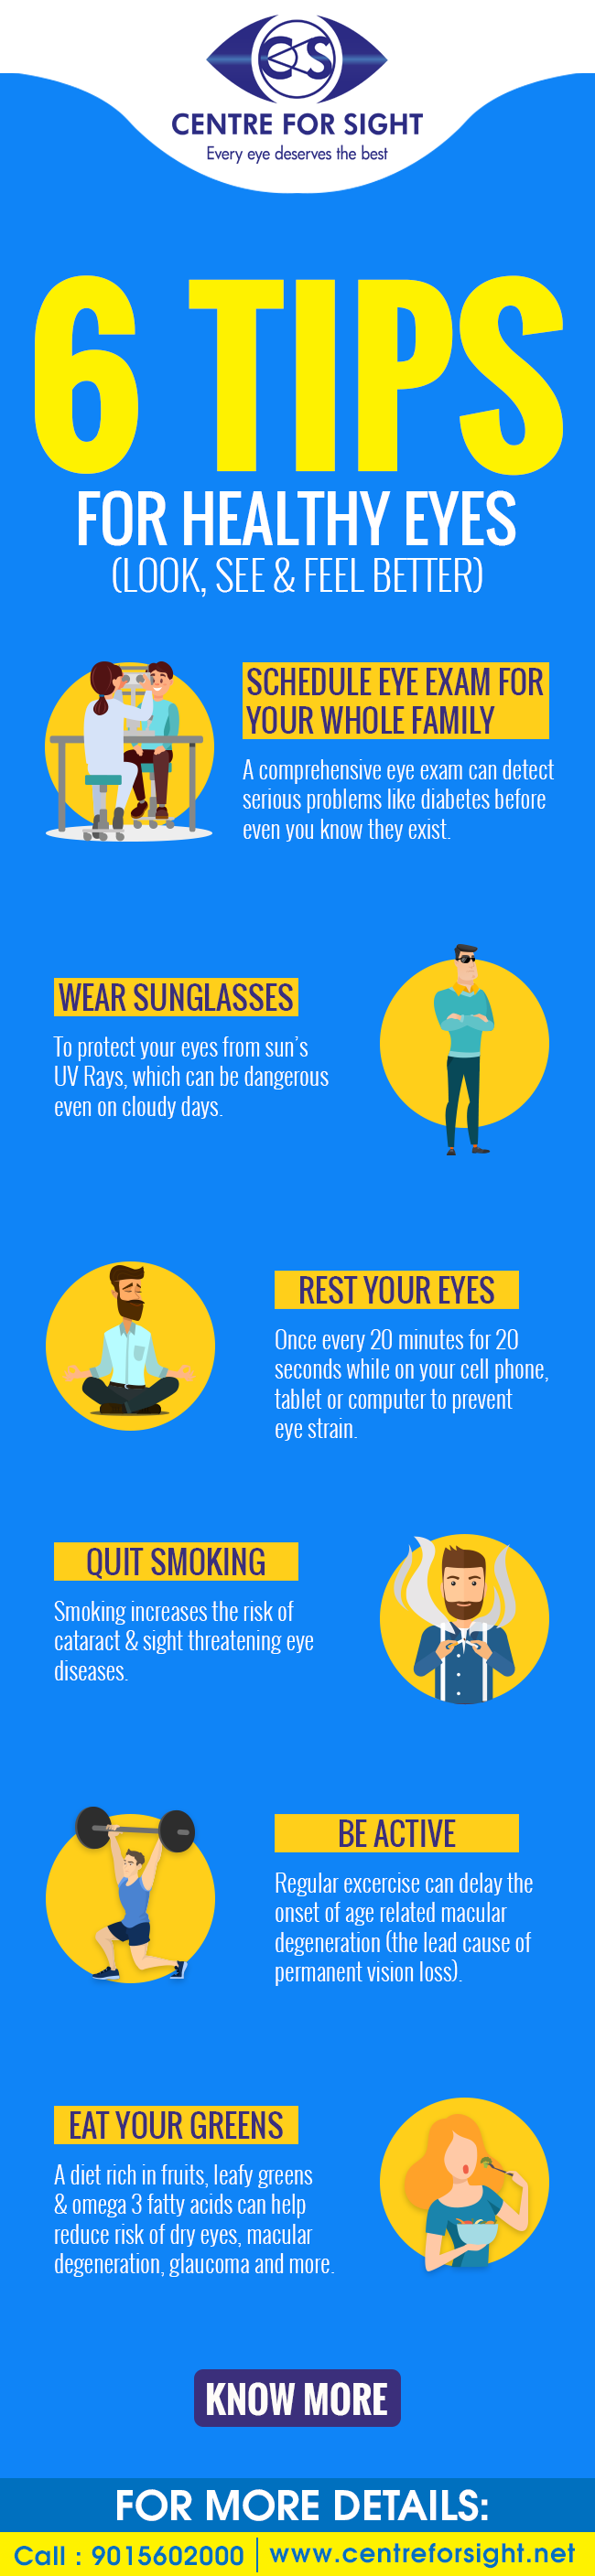 6 Tips For Healthy Eyes